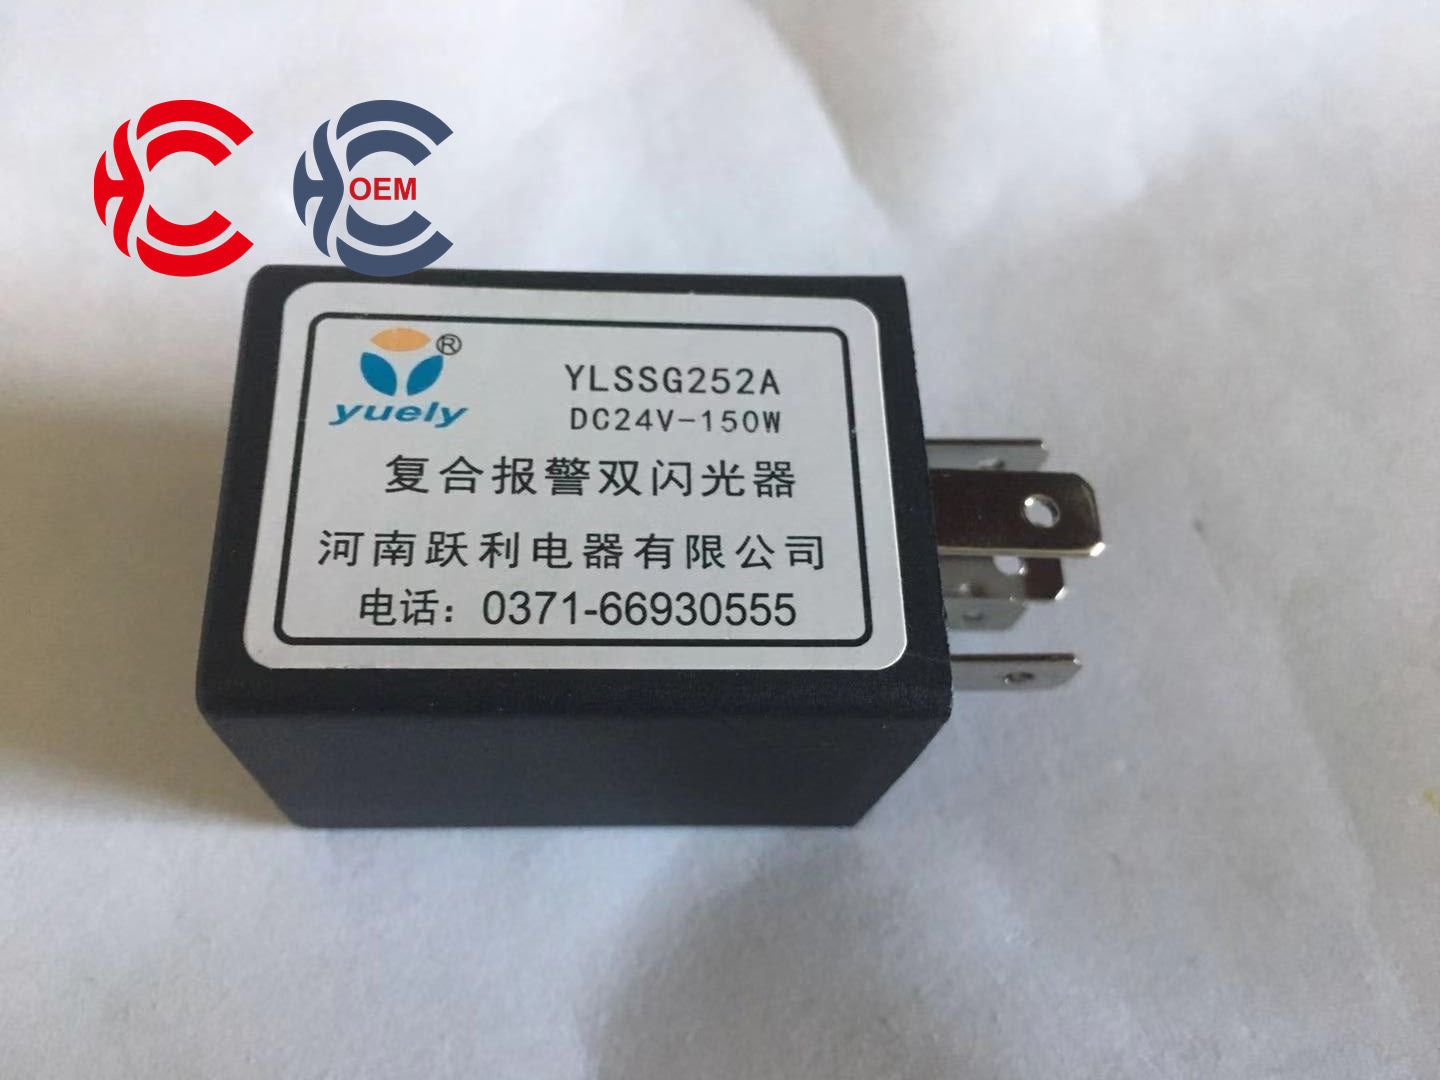 OEM: YLSSG252AMaterial: ABS Color: black Origin: Made in ChinaWeight: 50gPacking List: 1* Flash Relay More ServiceWe can provide OEM Manufacturing serviceWe can Be your one-step solution for Auto PartsWe can provide technical scheme for you Feel Free to Contact Us, We will get back to you as soon as possible.